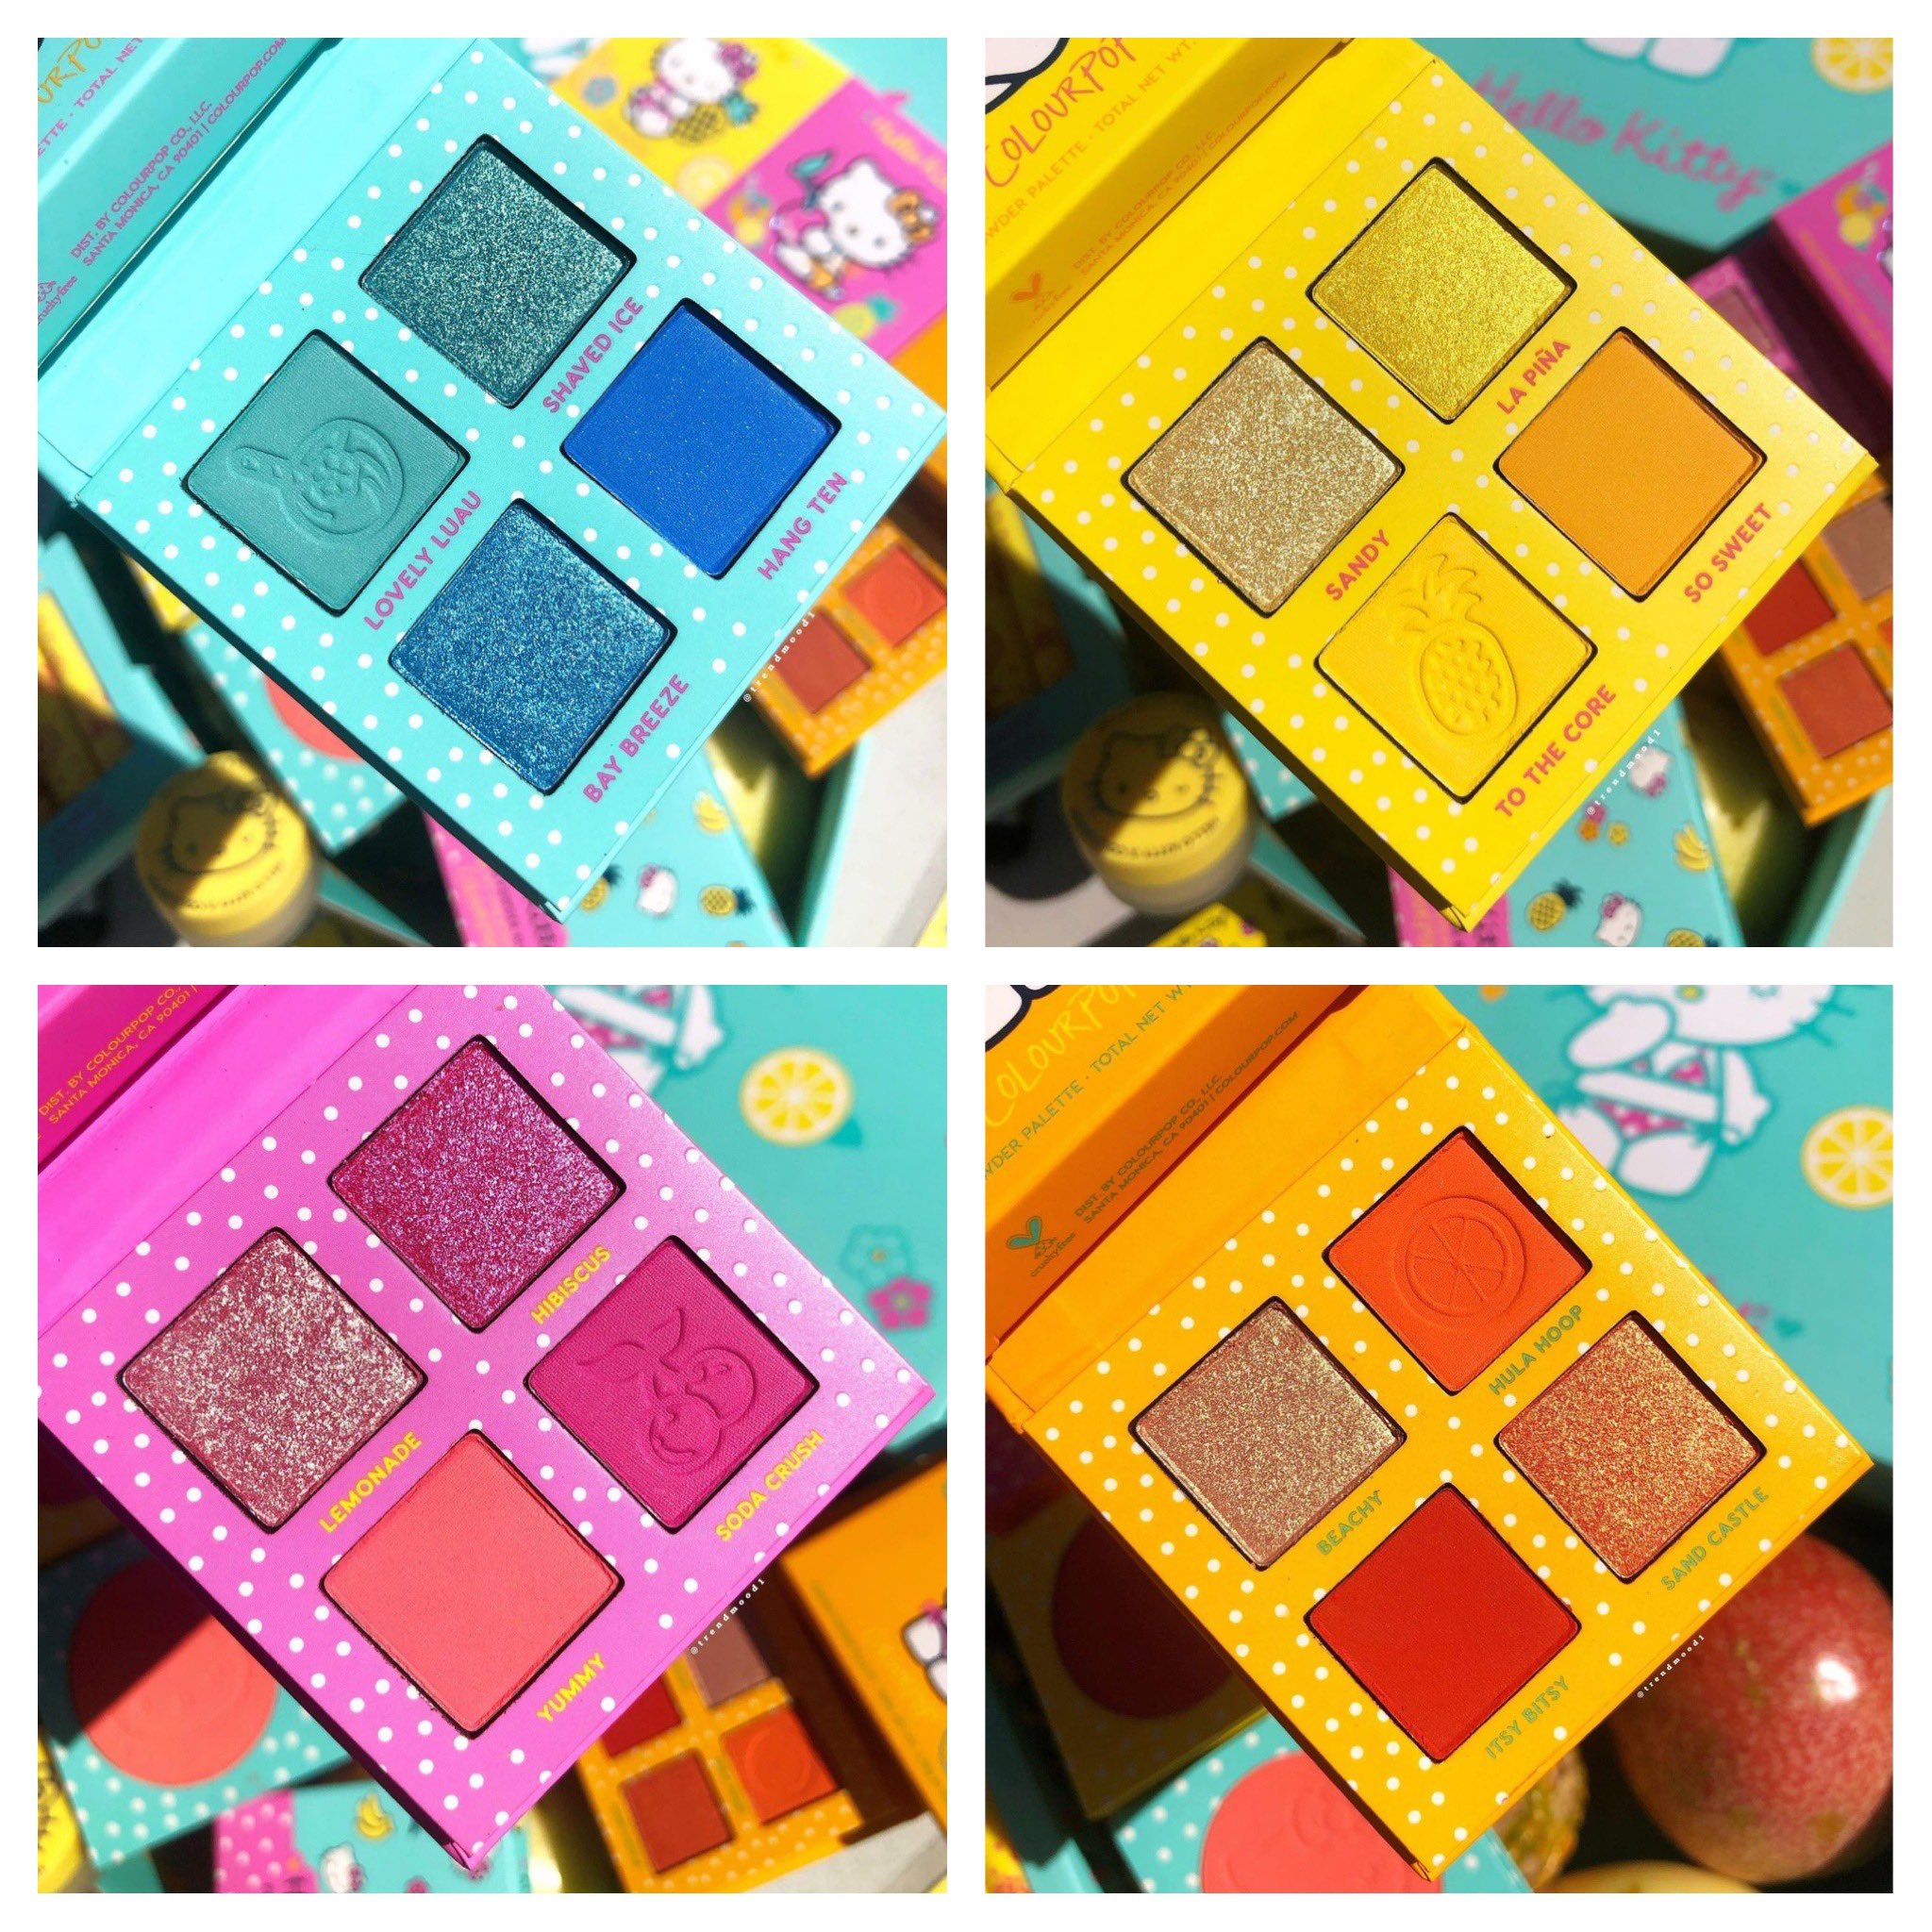 ColourPop x Hello Kitty1 - ColourPop x Hello Kitty New Summer Collection